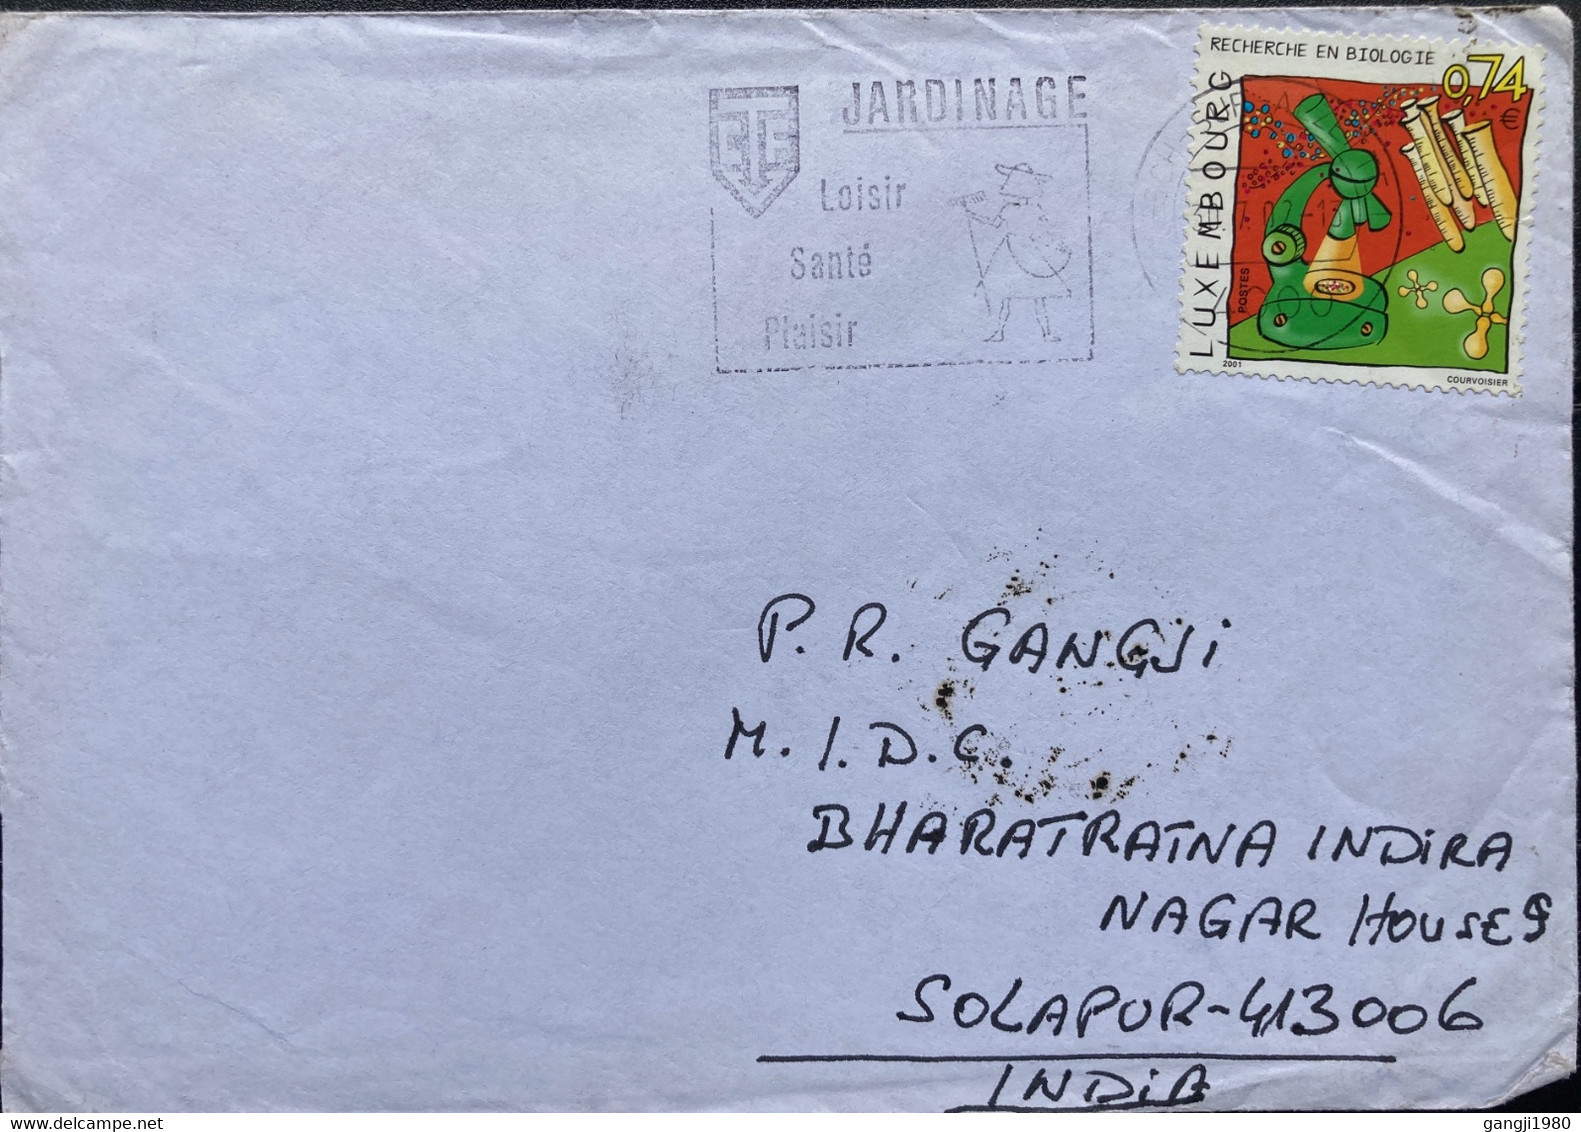 LUXEMBOURG 2002, REASERCH ,MICROSCOPE, LABROTARY ,JARDINAGE LOISIR SANTE PLAISIR ,GARDENING FOR HEALTH, COVER TO INDIA - Brieven En Documenten